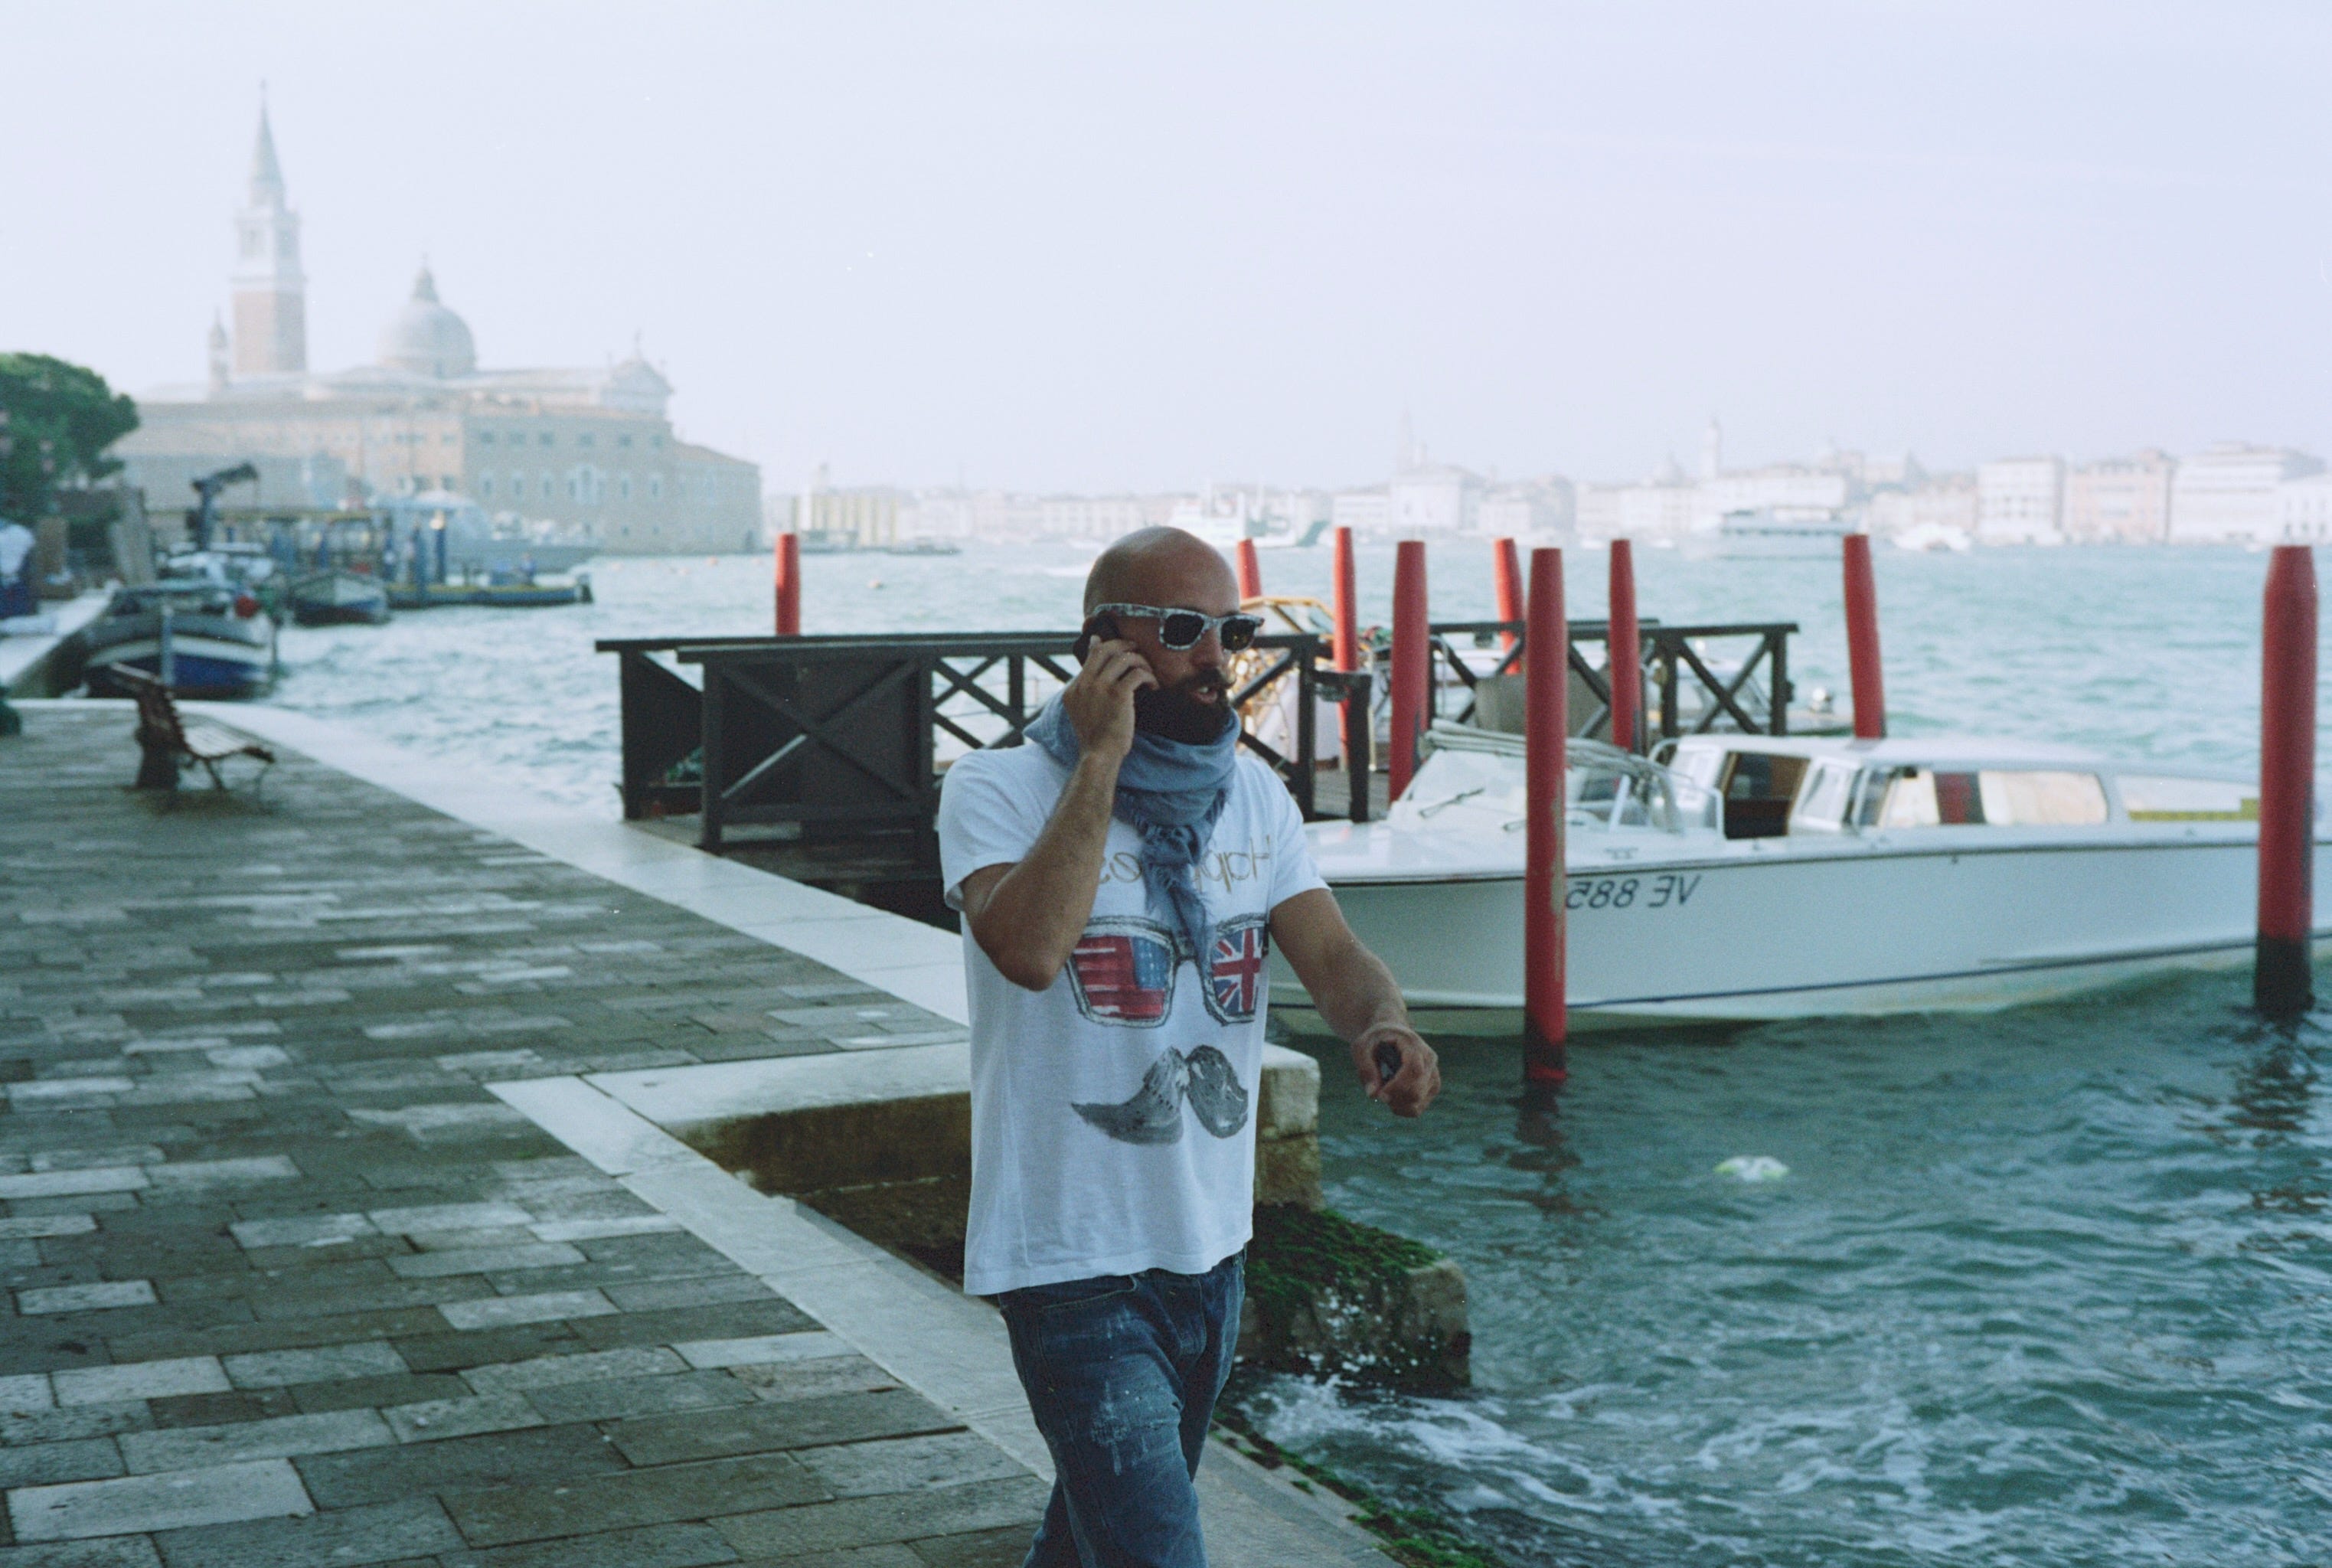 A bald man with a beard talks on his phone as he passes water taxis in Venice.